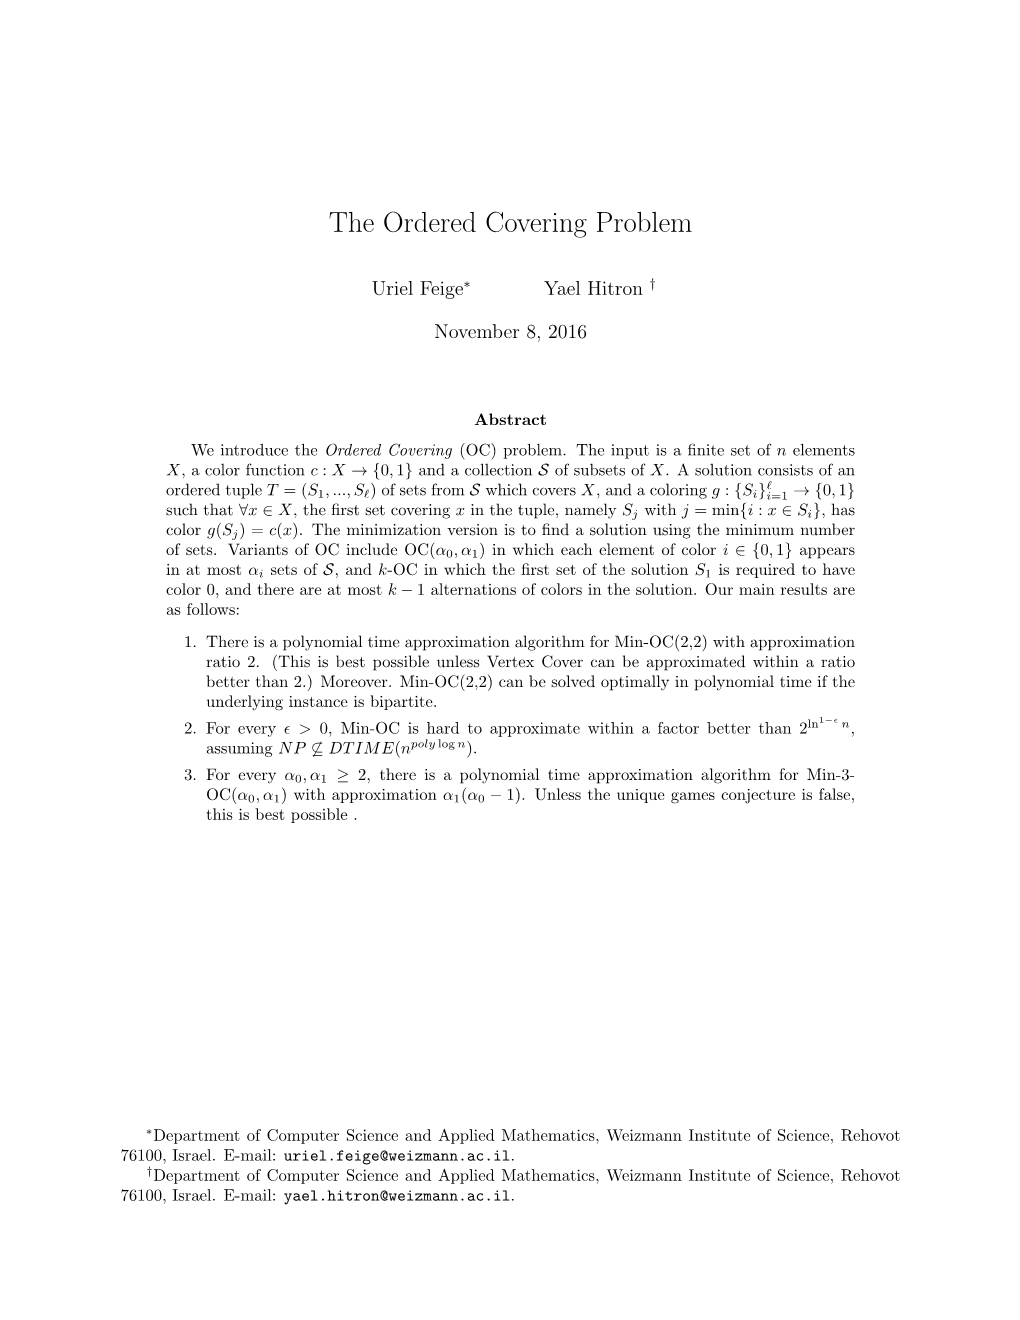 The Ordered Covering Problem